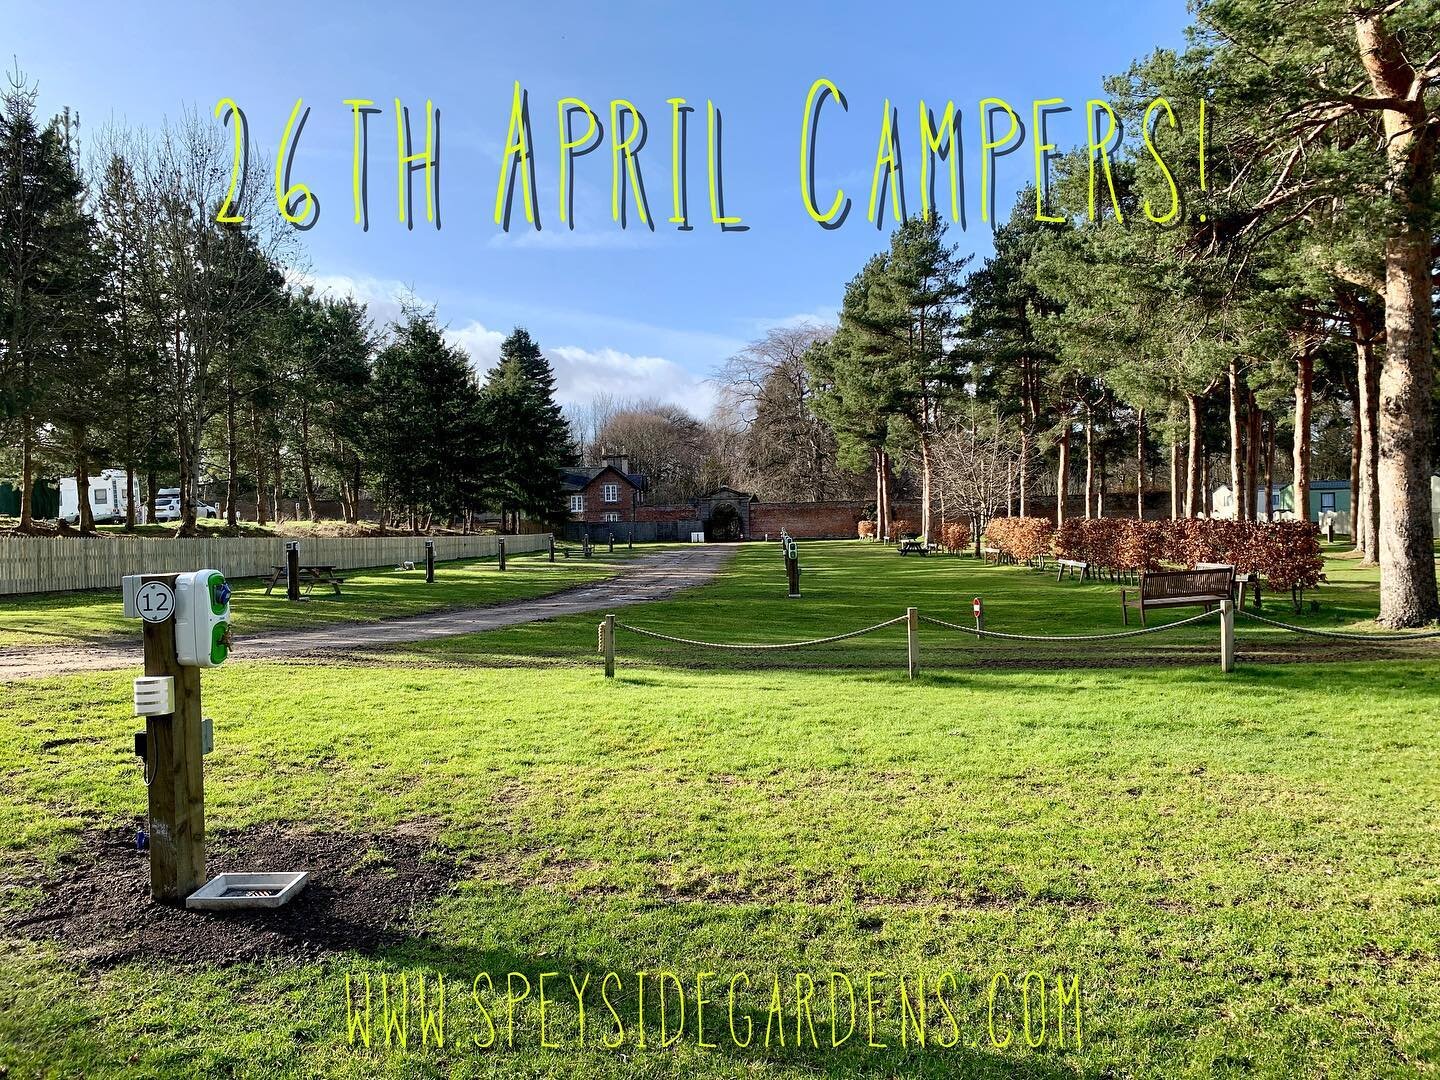 Attention all Campers ! Exciting news today... Speyside Gardens will be open from Monday 26th April ! 🏕❤️🥃 We cannot wait to welcome you all back, here is a little view of the new and improved park... think 16amp vibes, think fully serviced pitches